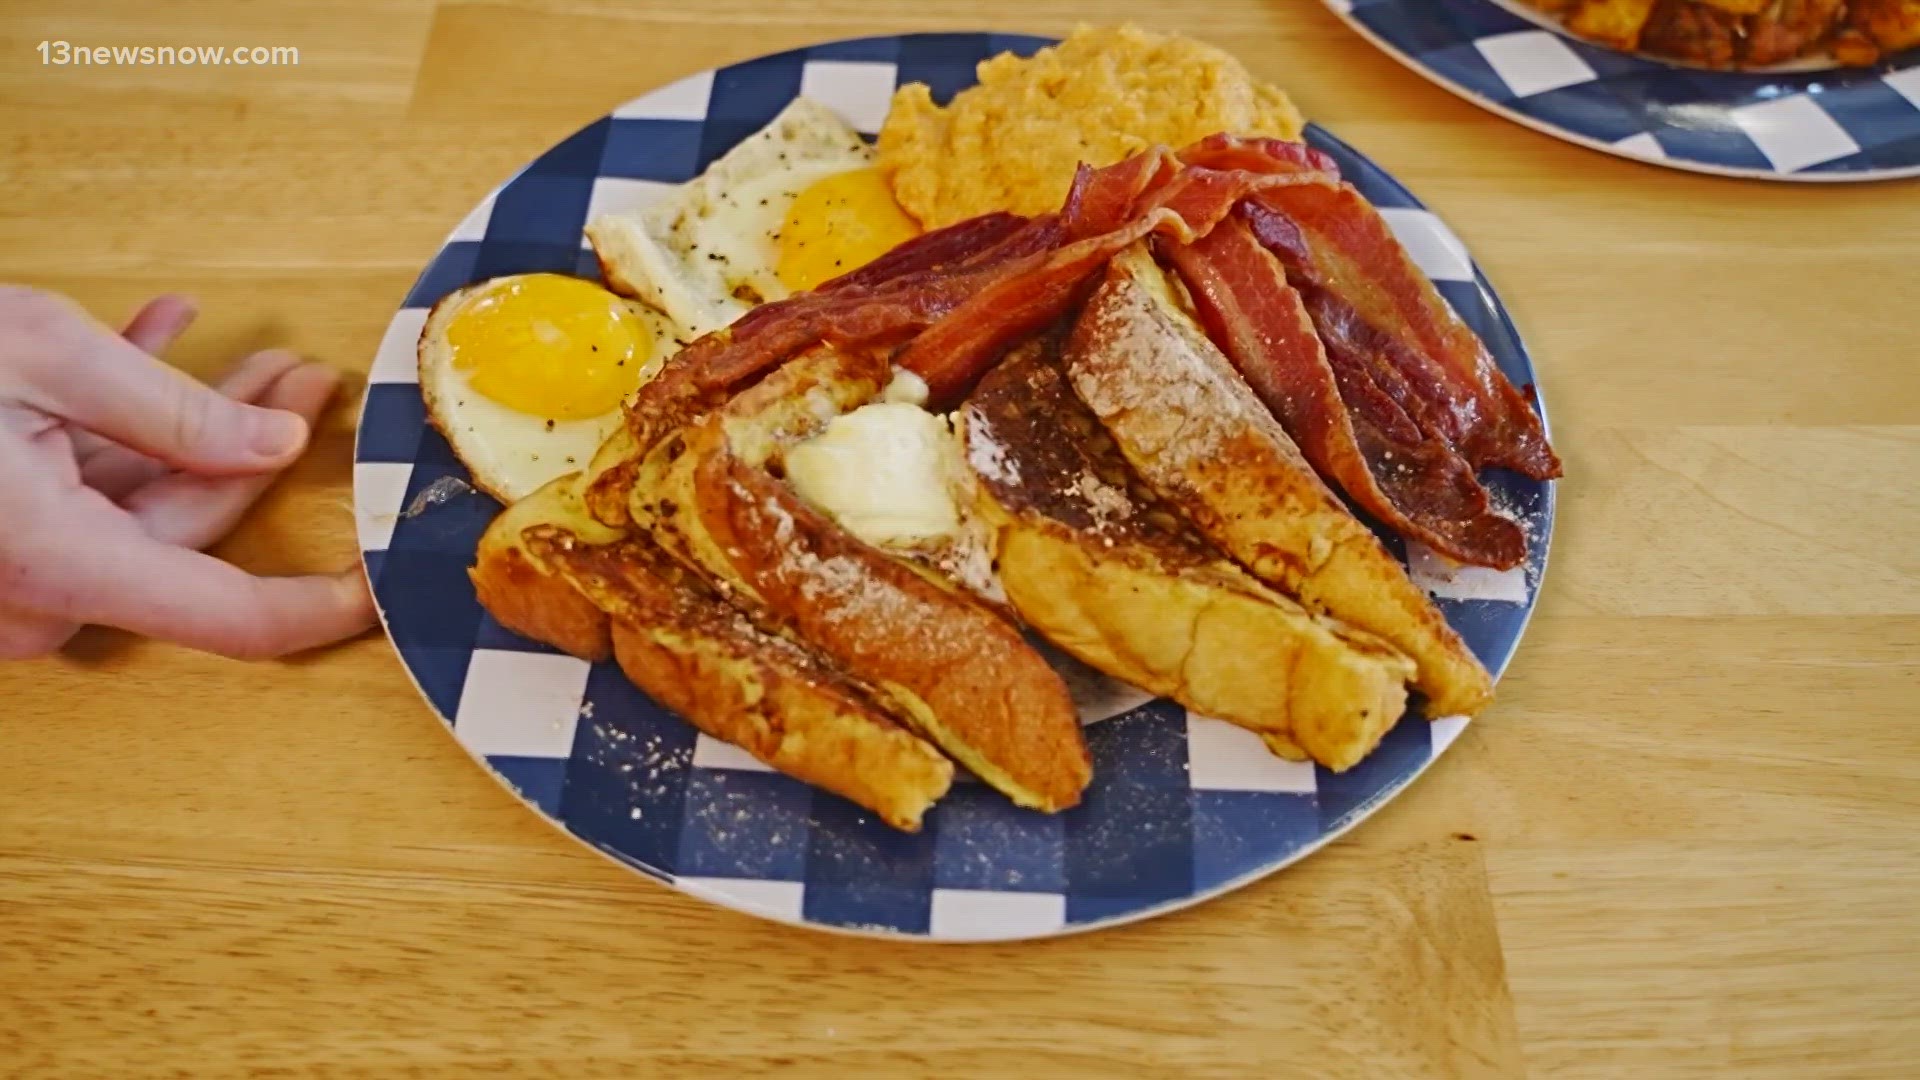 When you think hometown cooking but with flare, think 185 in Poquoson. 13News Now's Bethany Reese checked it out as part of our Friday Flavor series.